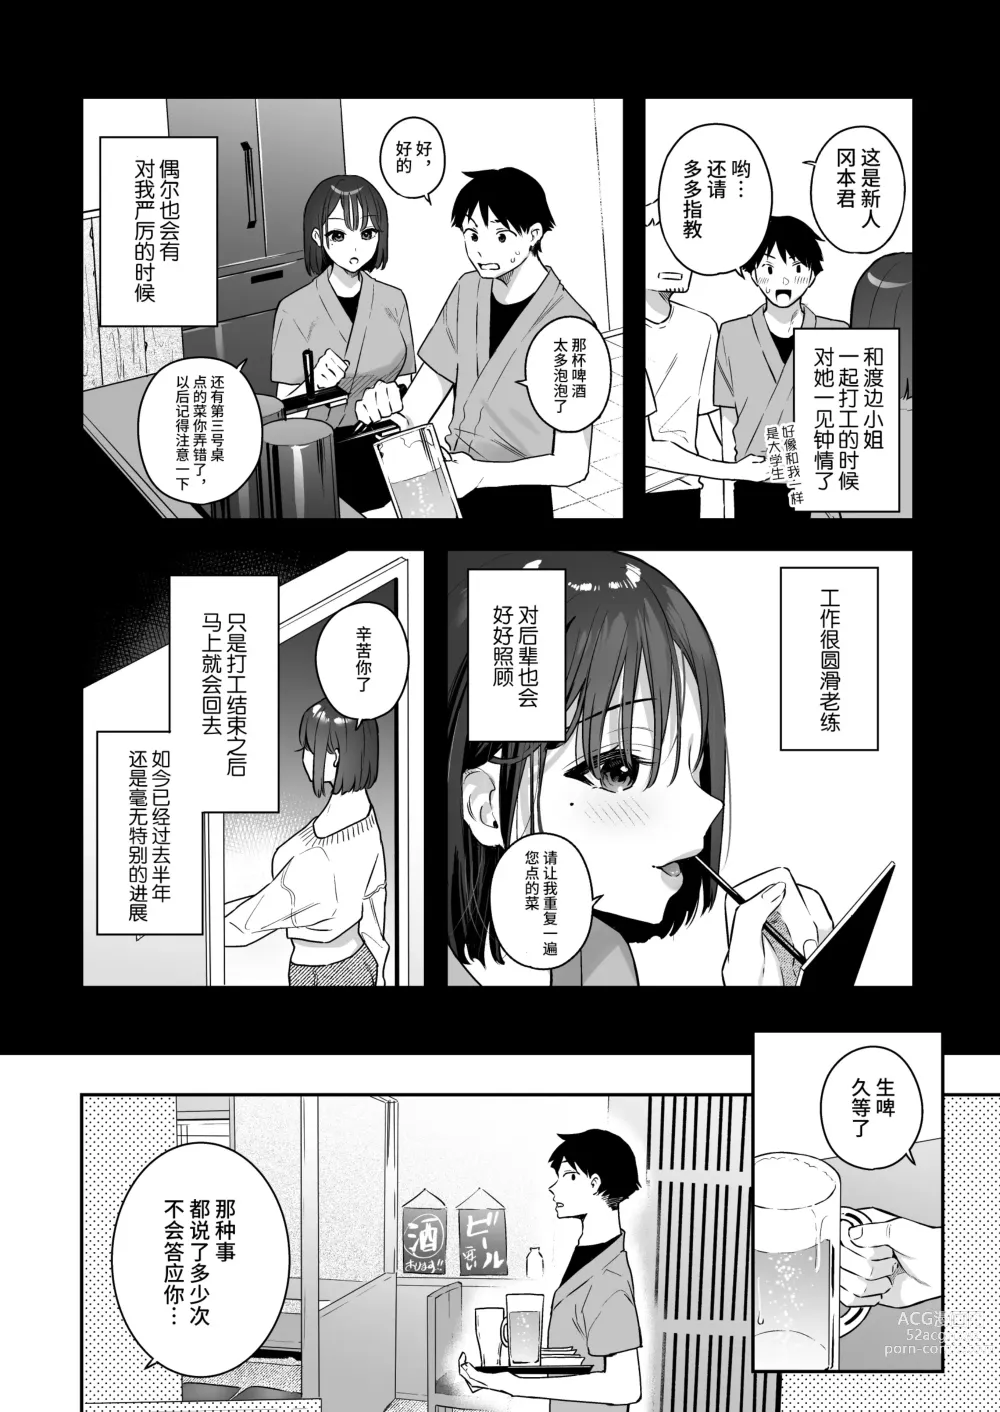 Page 4 of doujinshi 她的发情开关